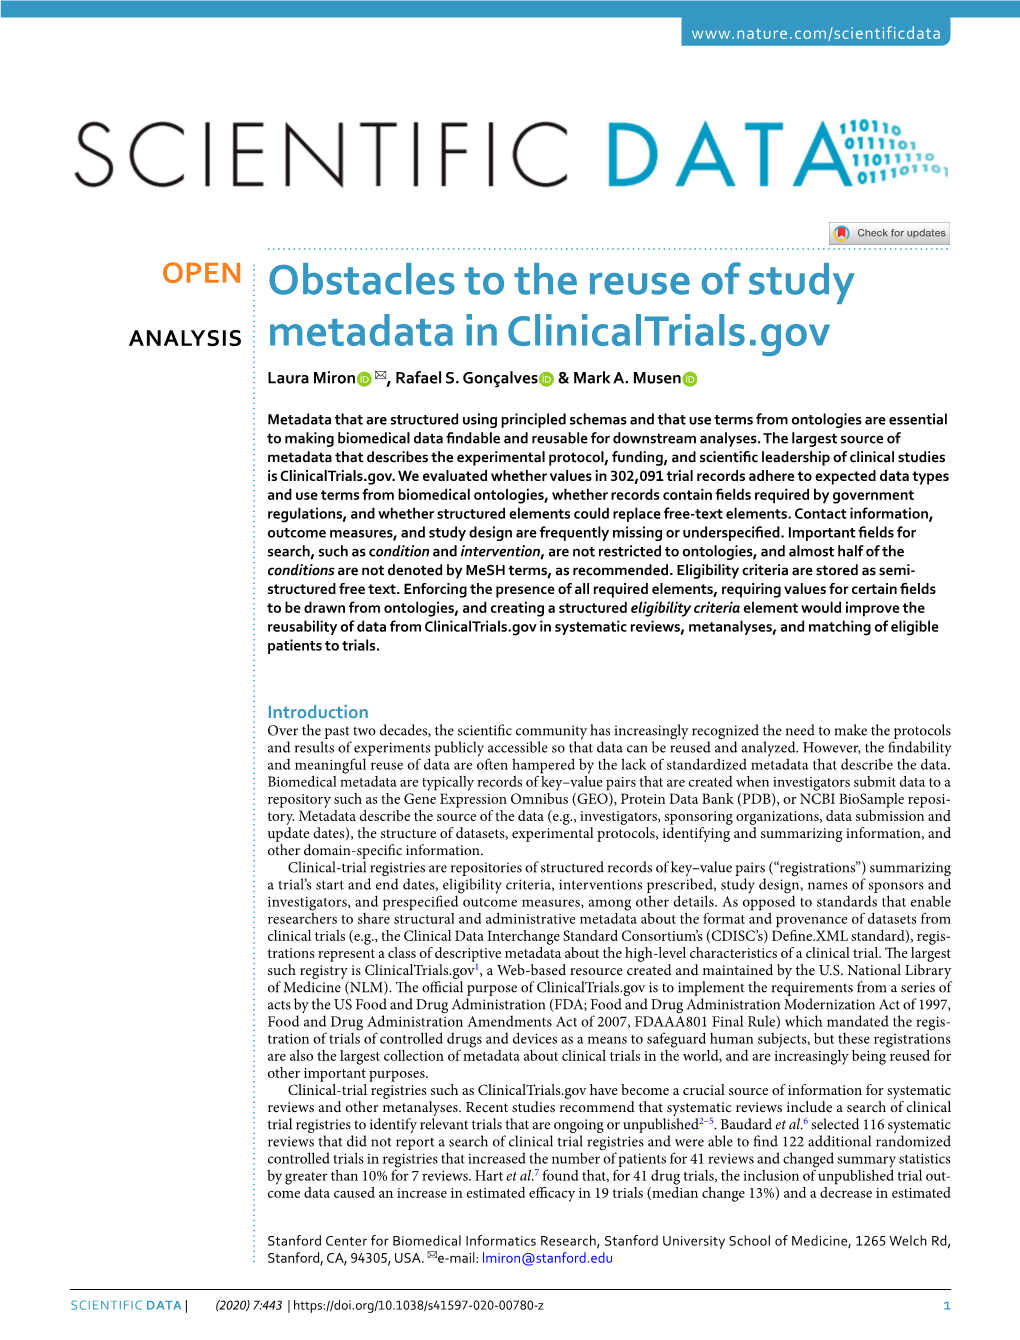 Obstacles to the Reuse of Study Metadata in Clinicaltrials.Gov’